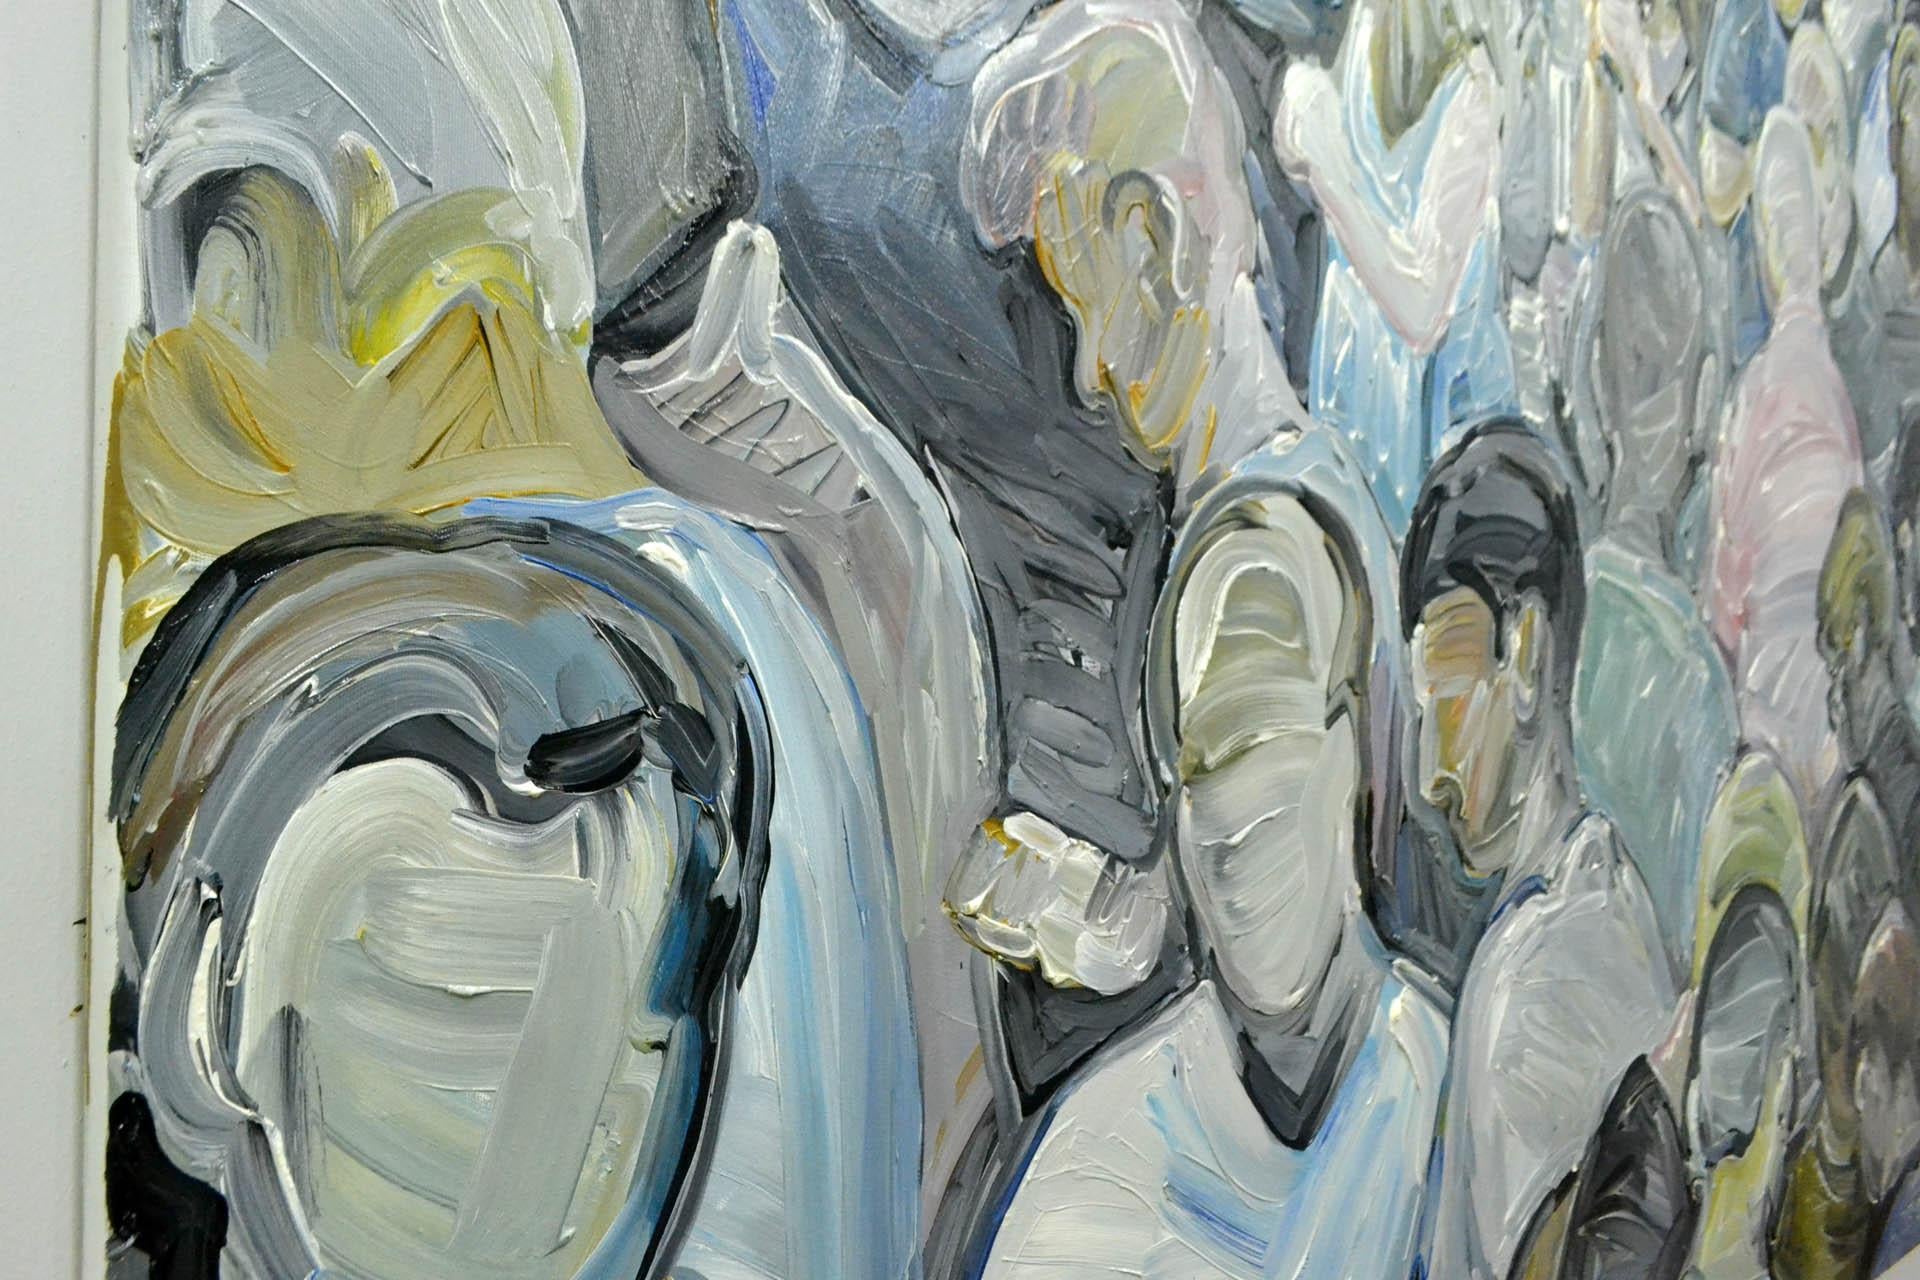 Crowd - People Portrait, Contemporary Expressive Figurative Oil Painting, XL For Sale 3